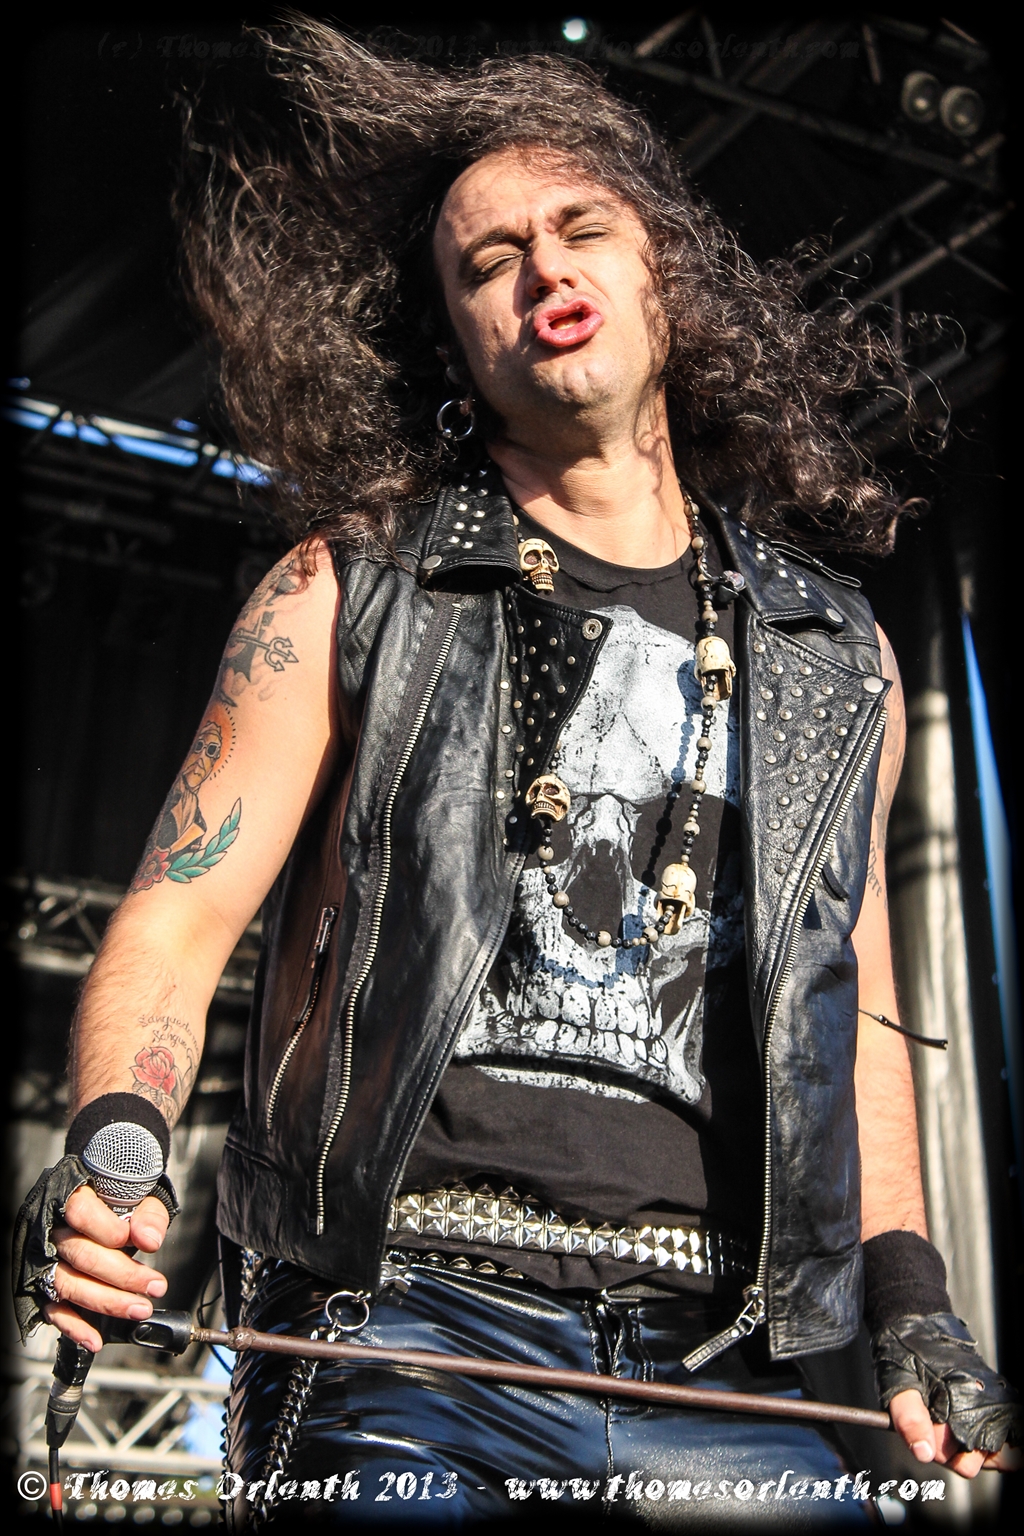 You are currently viewing Moonspell au Motocultor 2013